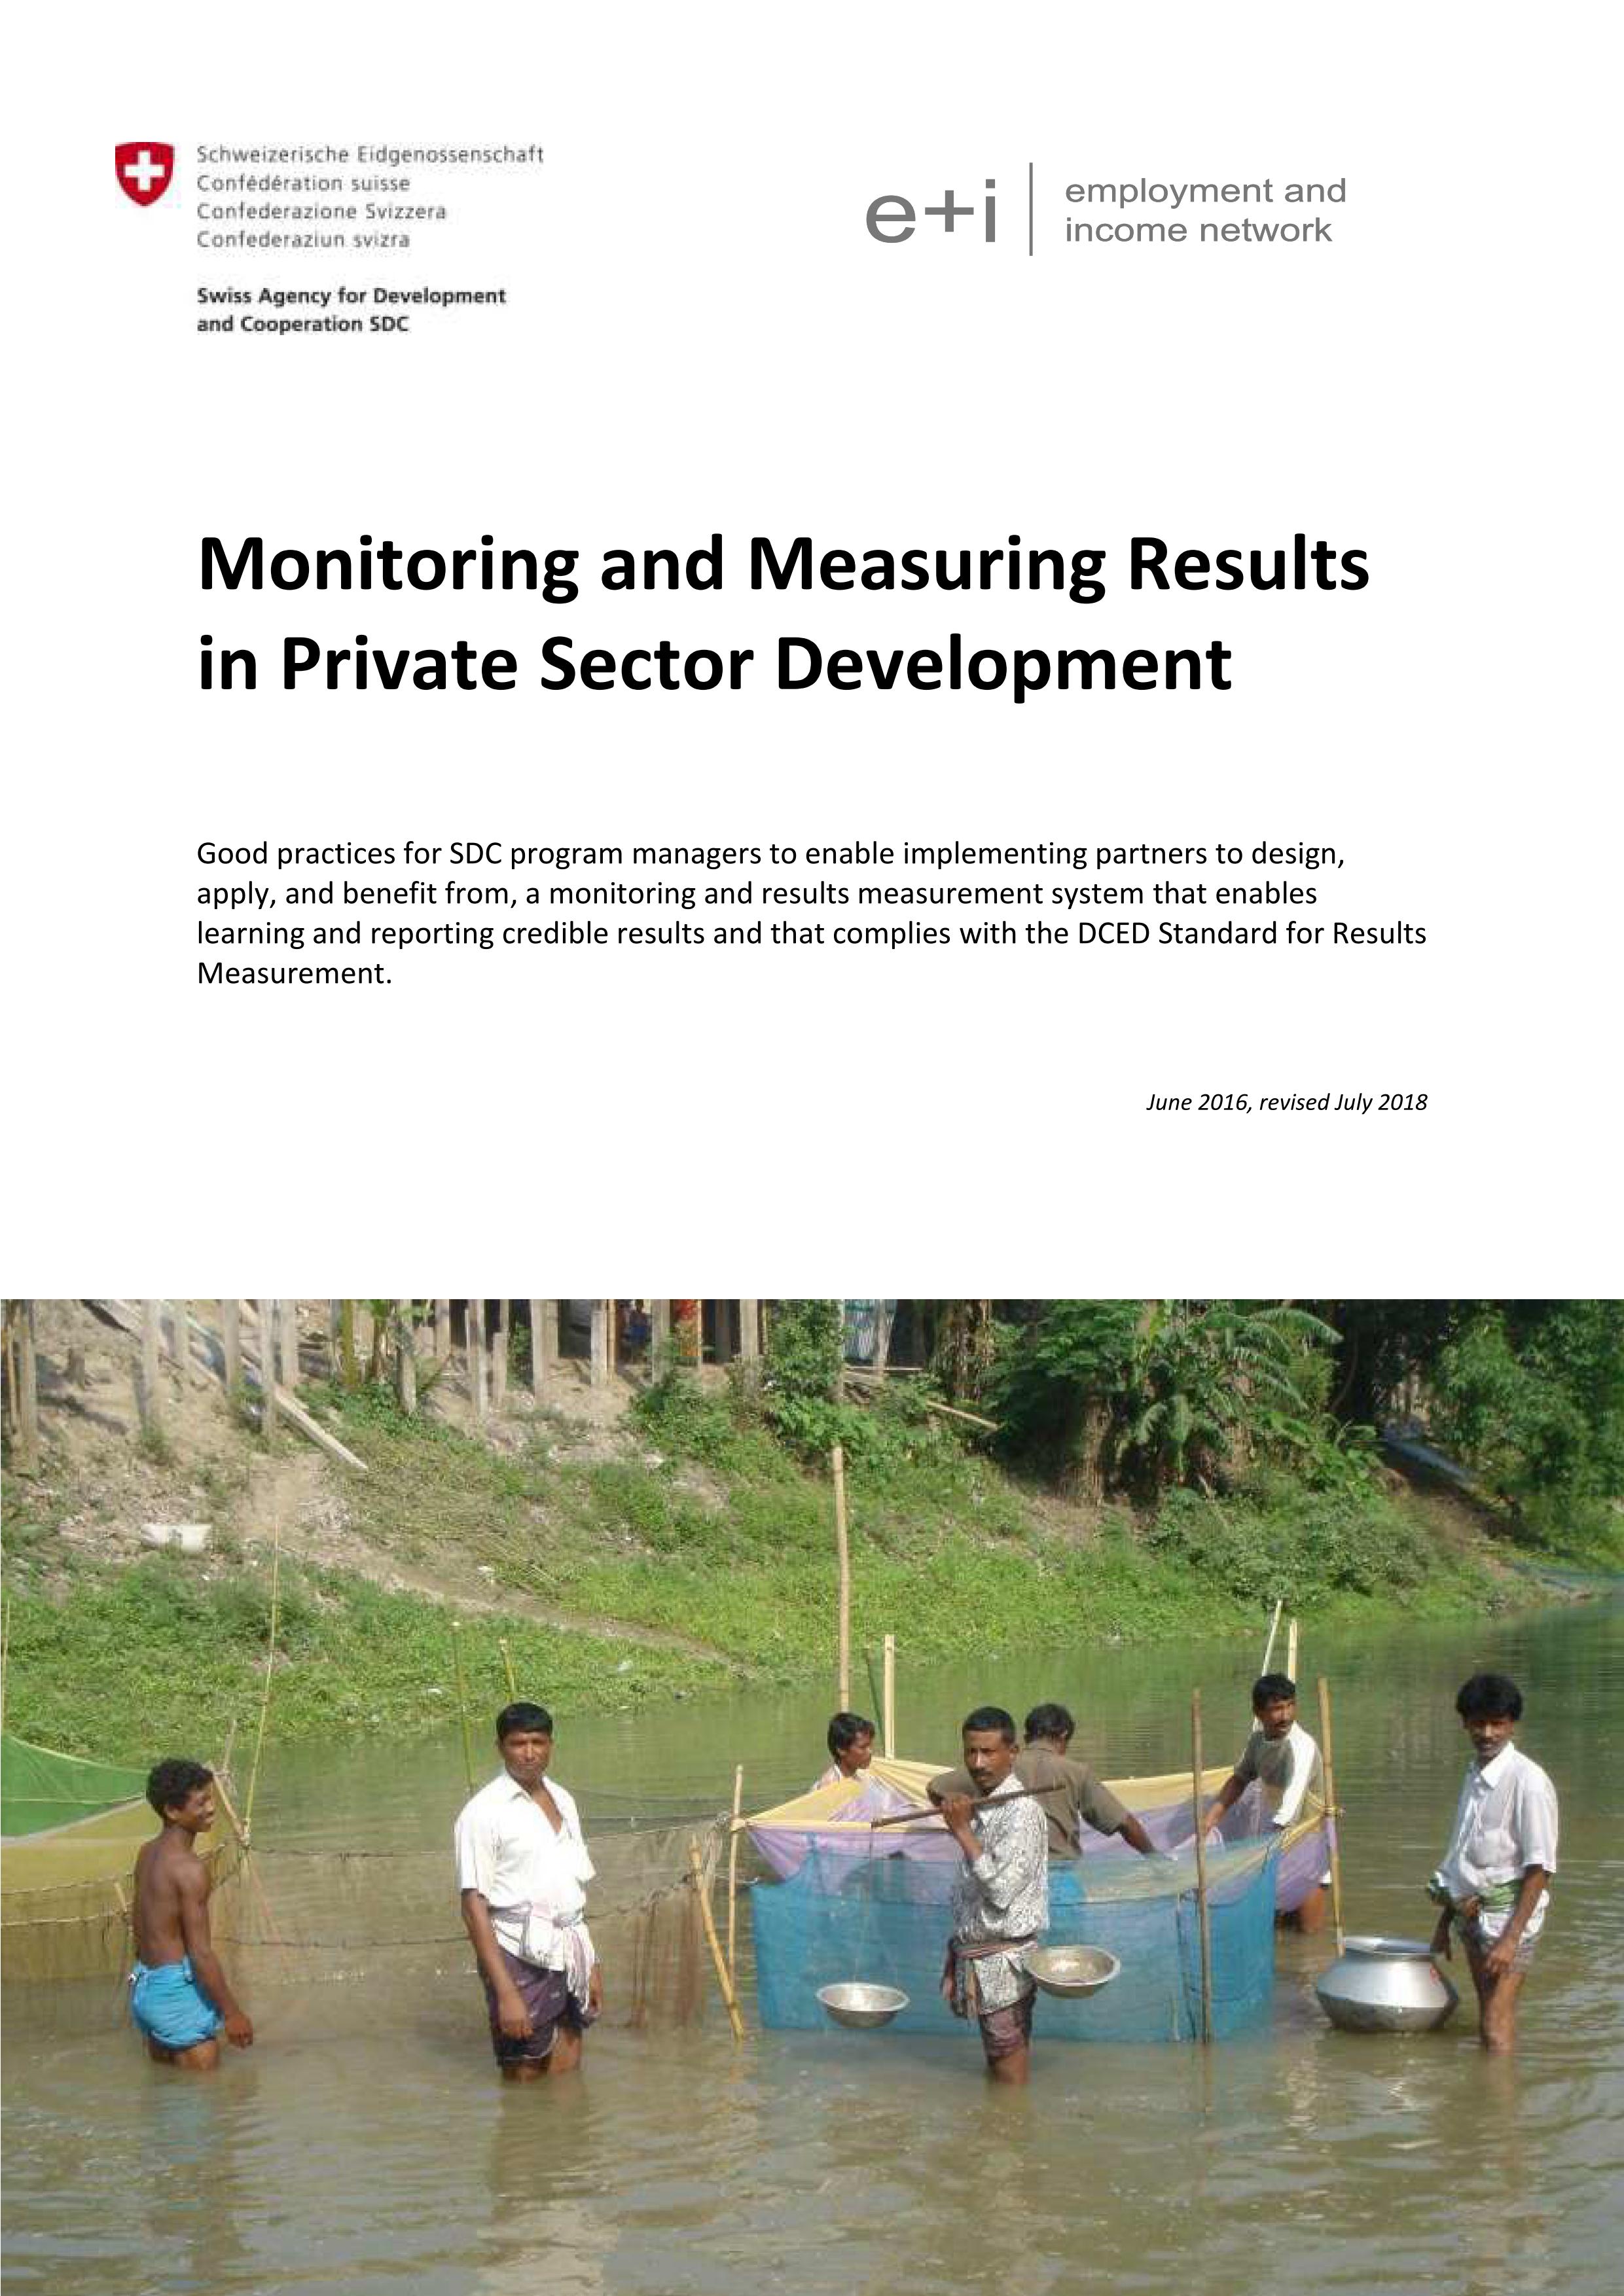 SDC Monitoring and Measuring Results in Private Sector Development